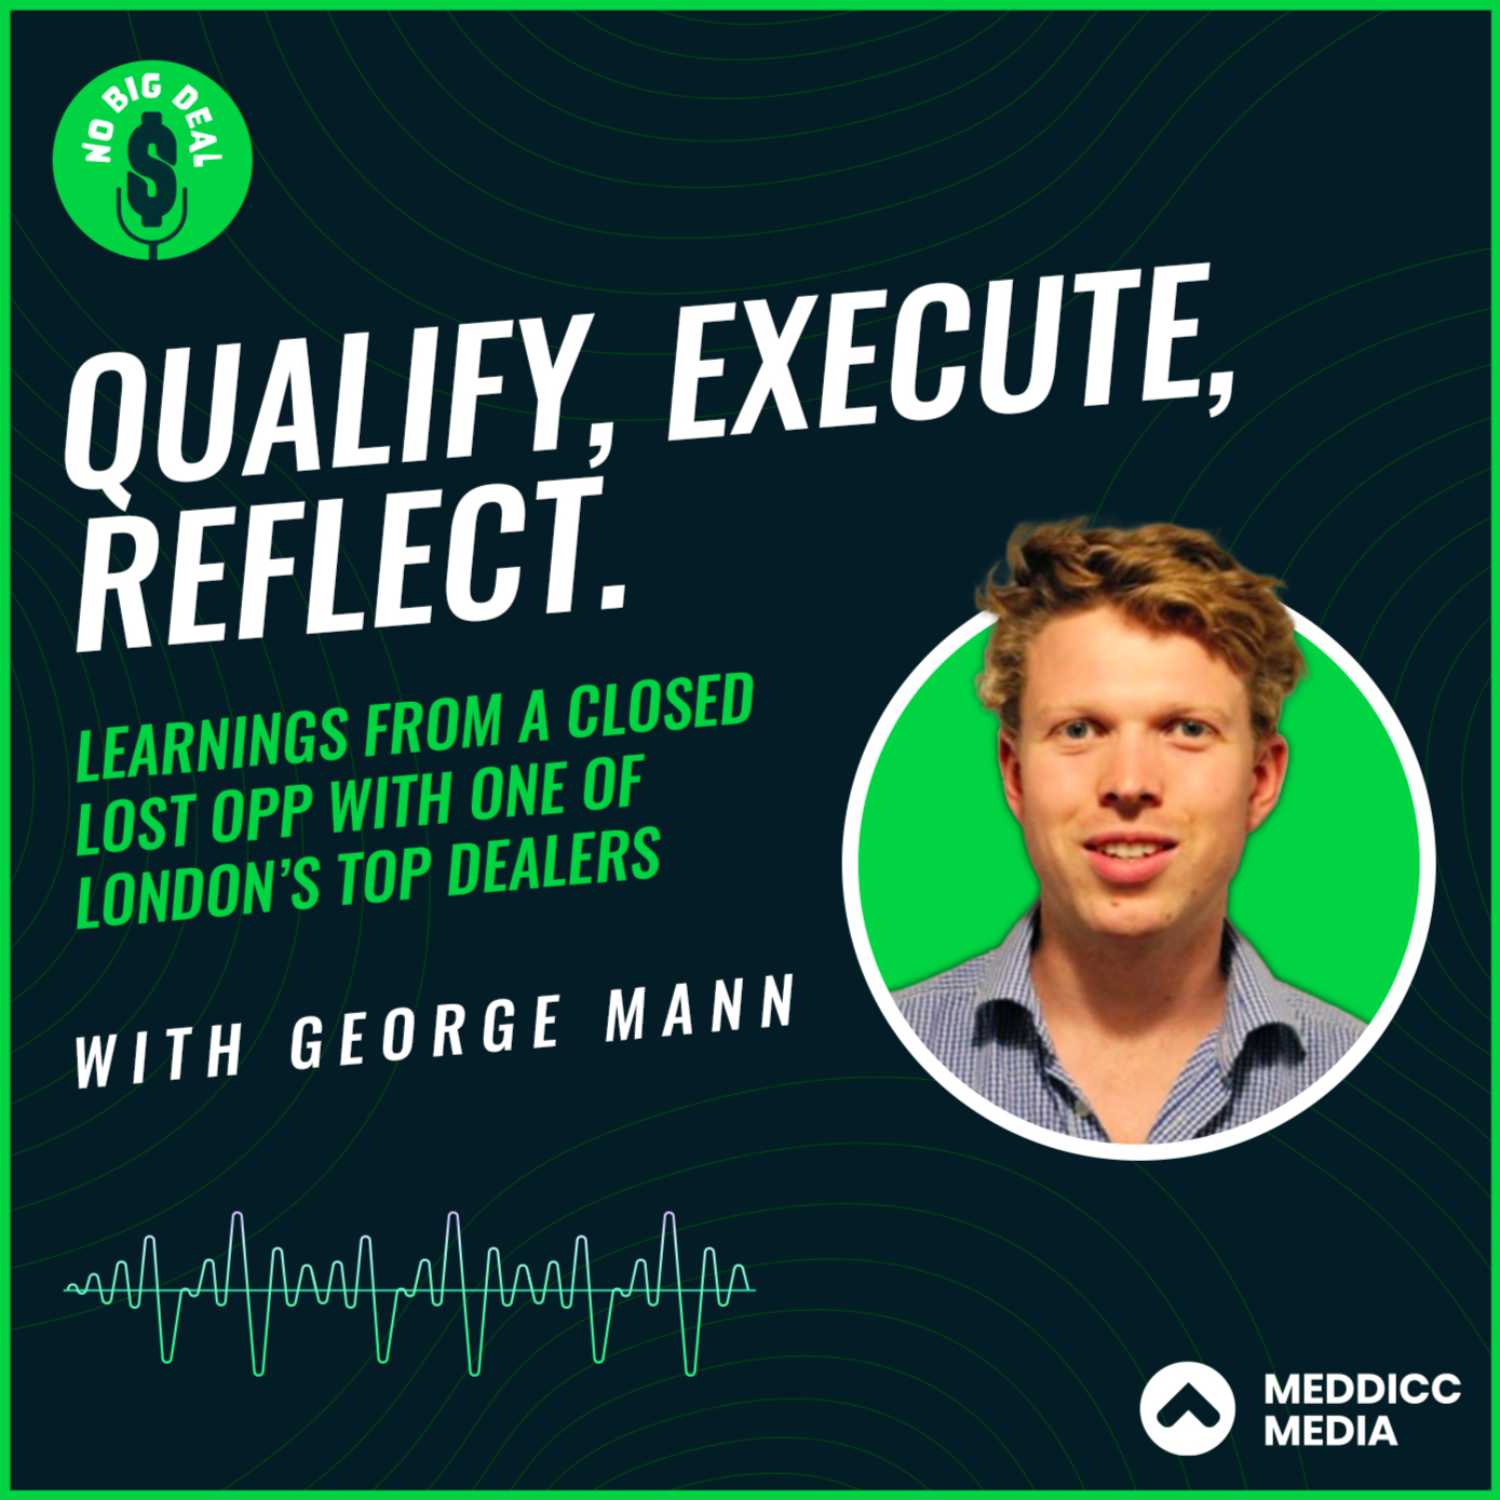 Season #2, Episode #5 George Mann: Qualify, execute, reflect. Learnings from a closed lost opp with one of Londons top dealers